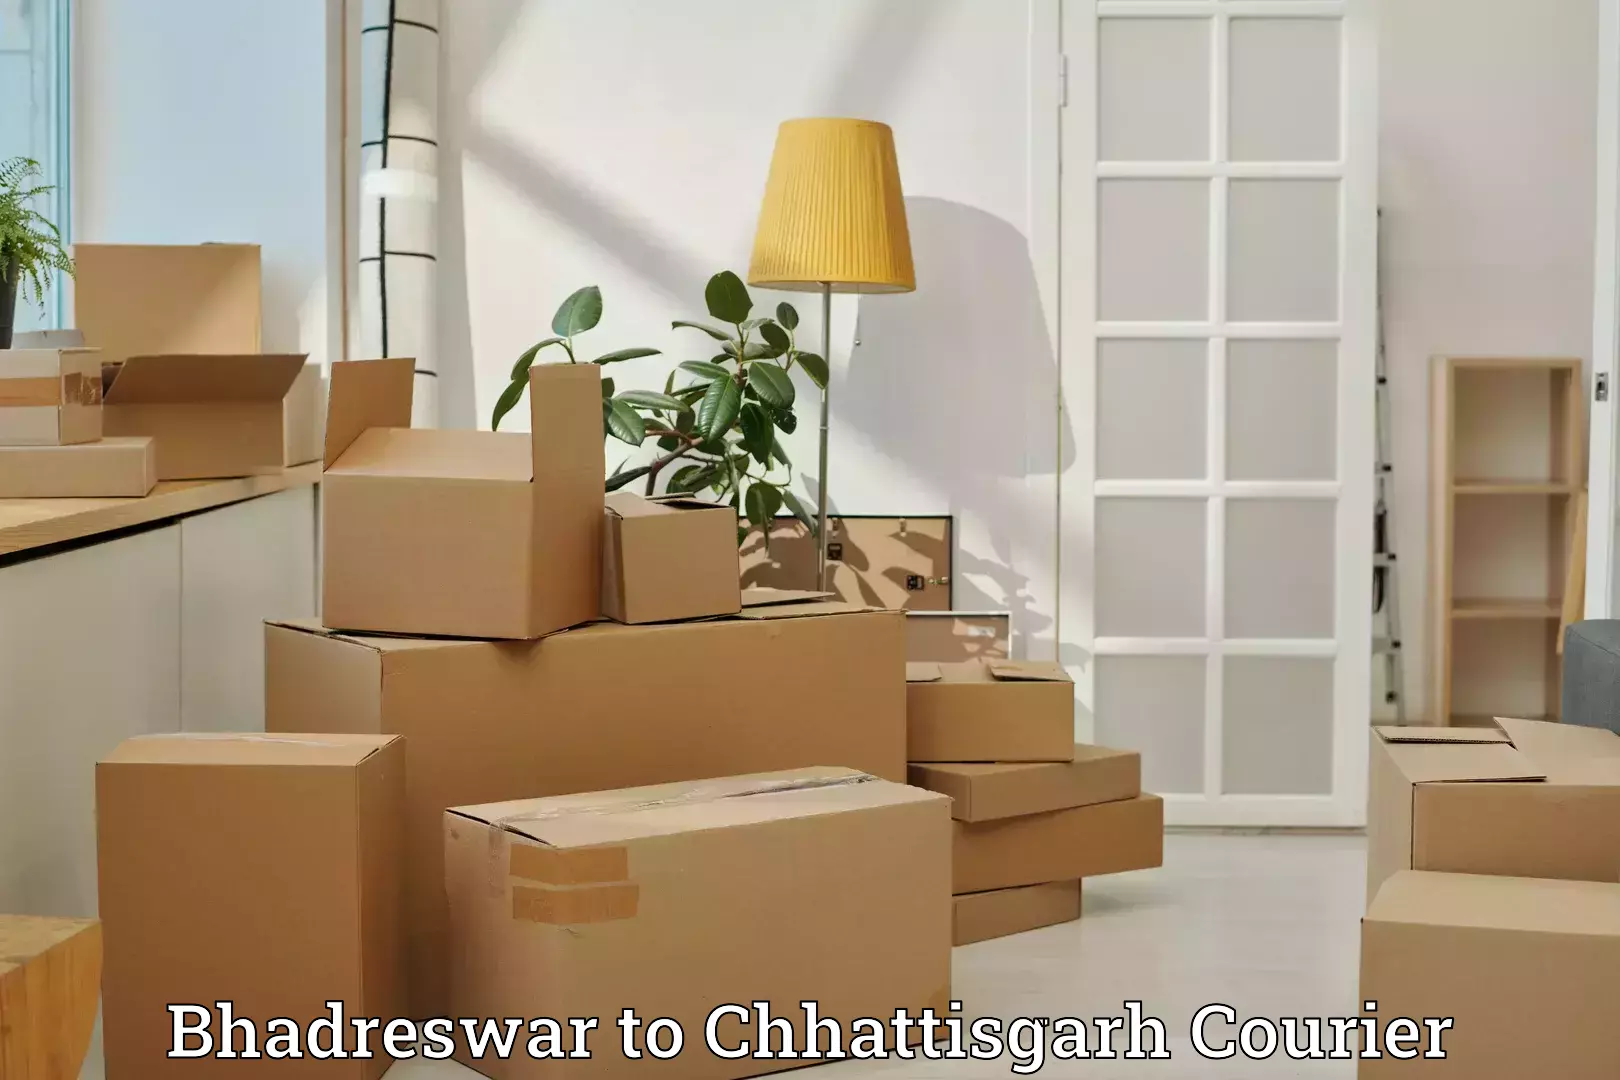 Personal effects shipping in Bhadreswar to Chhattisgarh